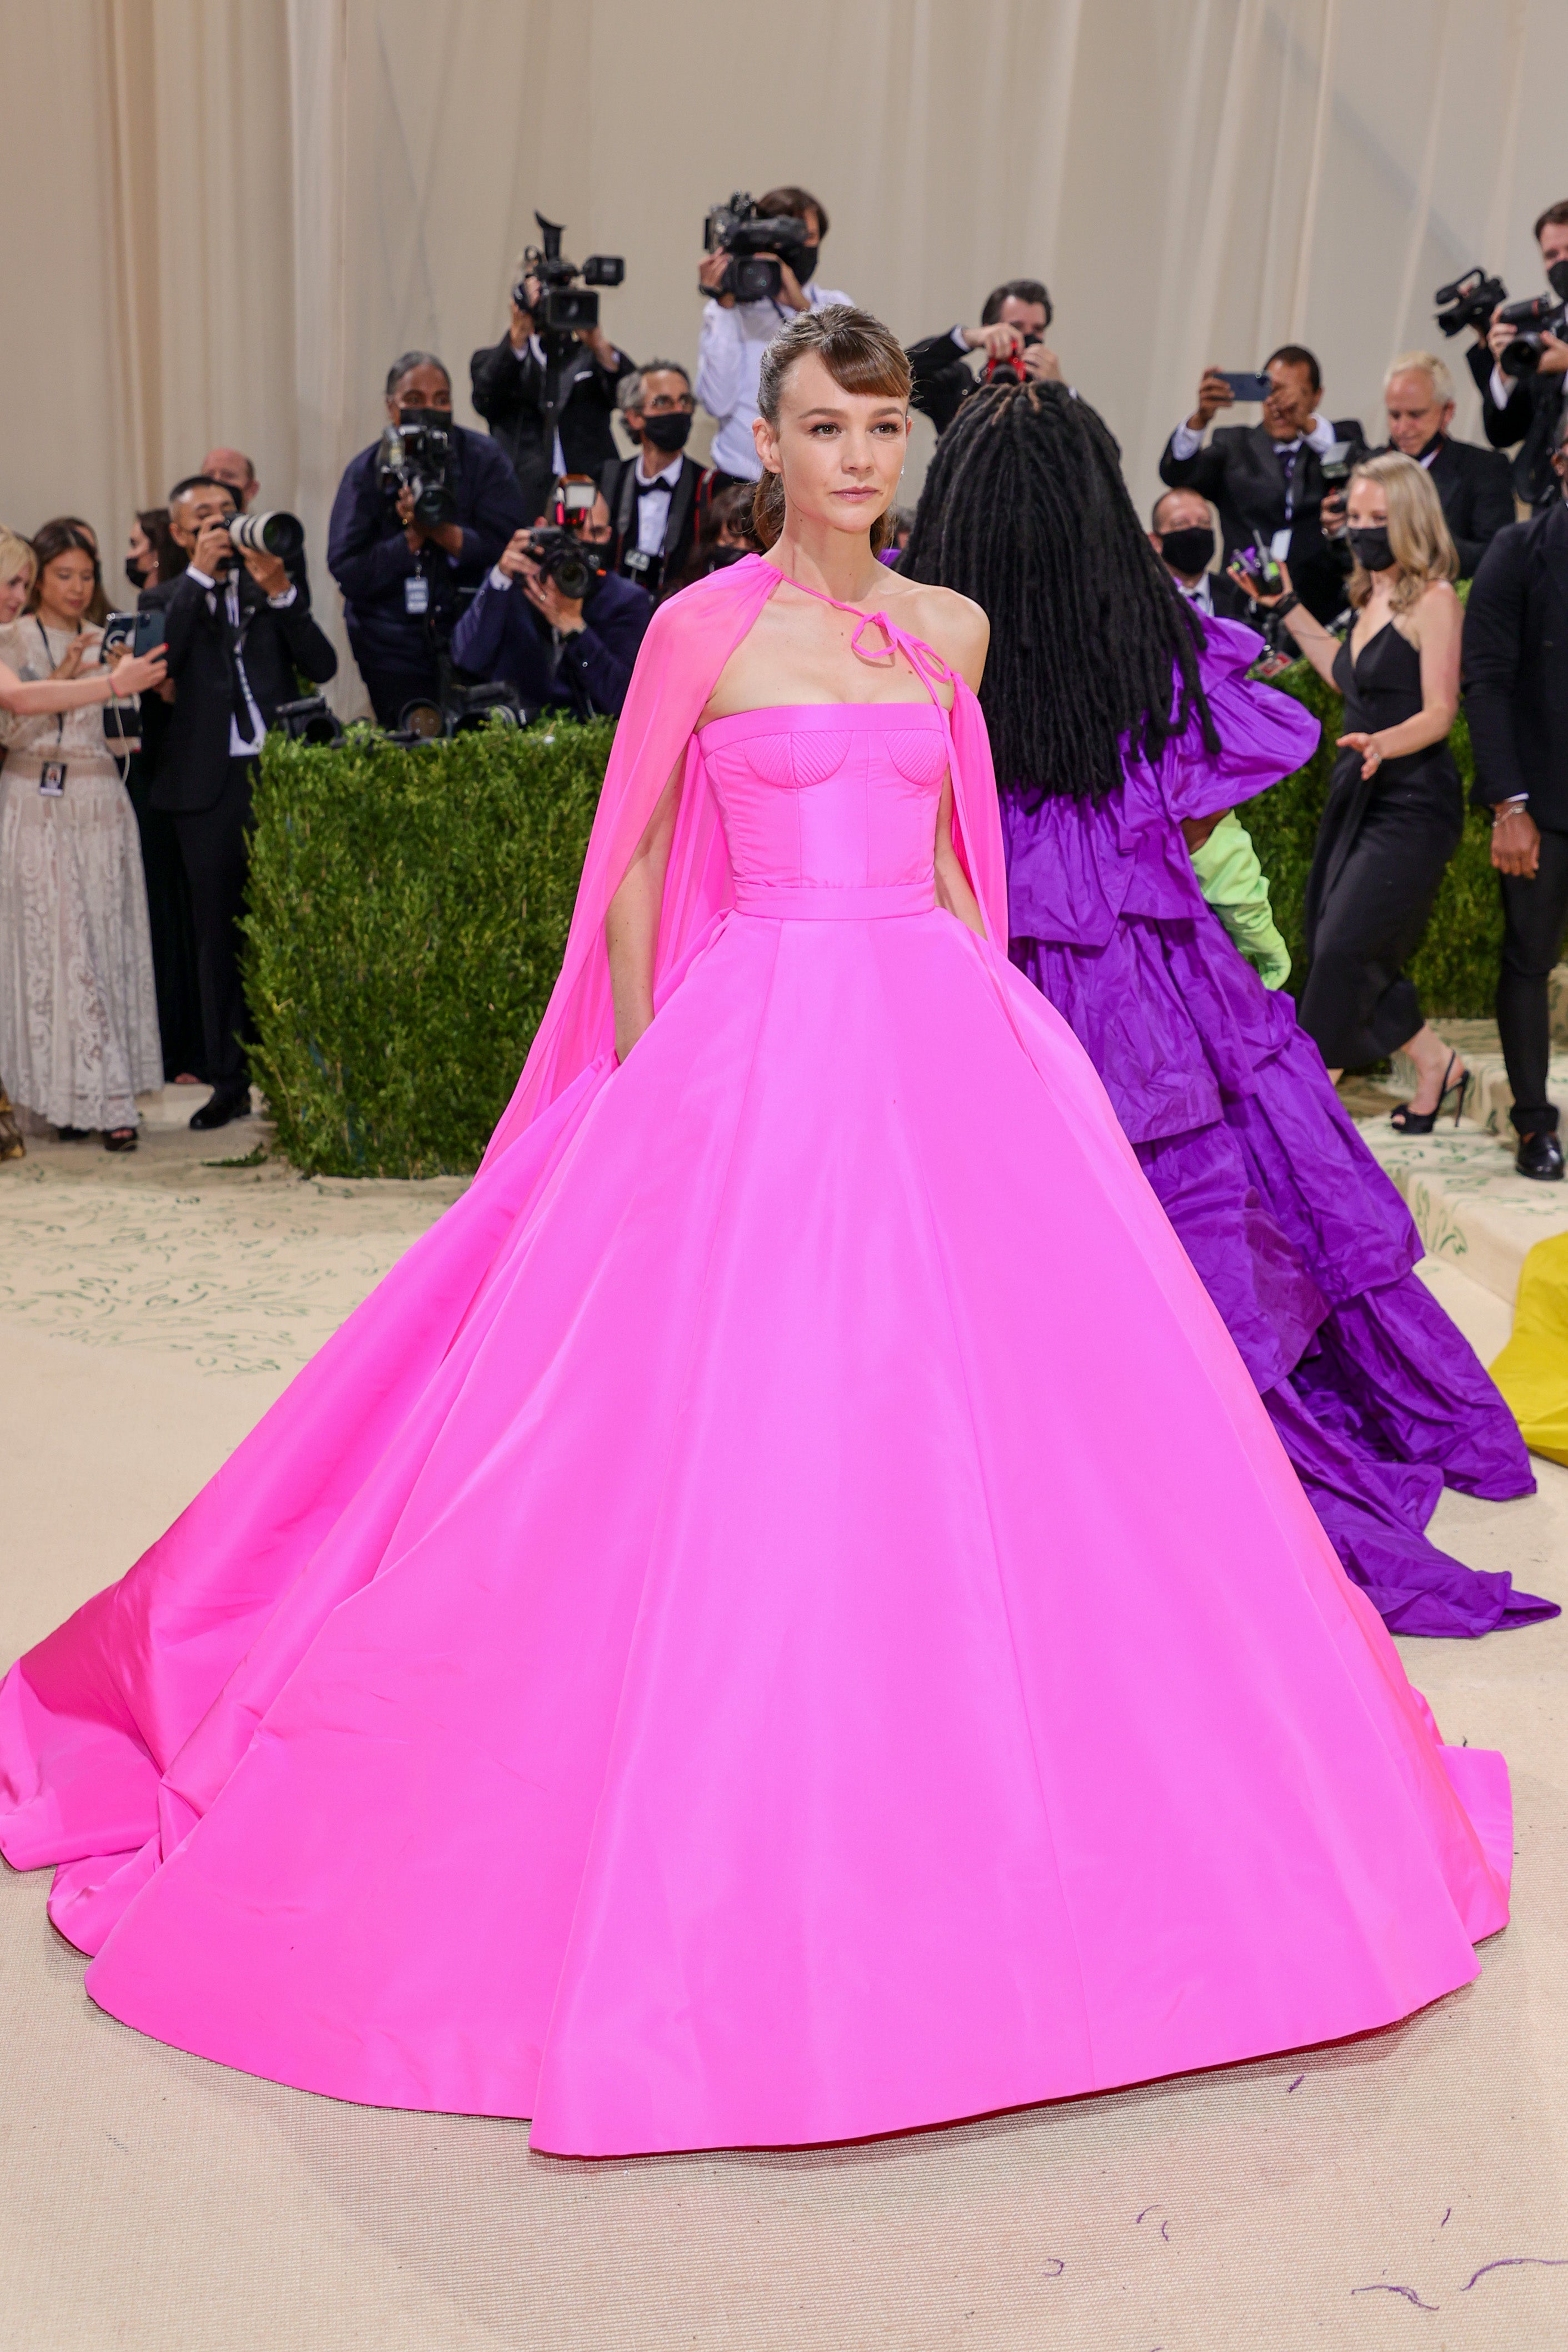 The ‘Promising Young Woman’ star wore a bright pink gown.